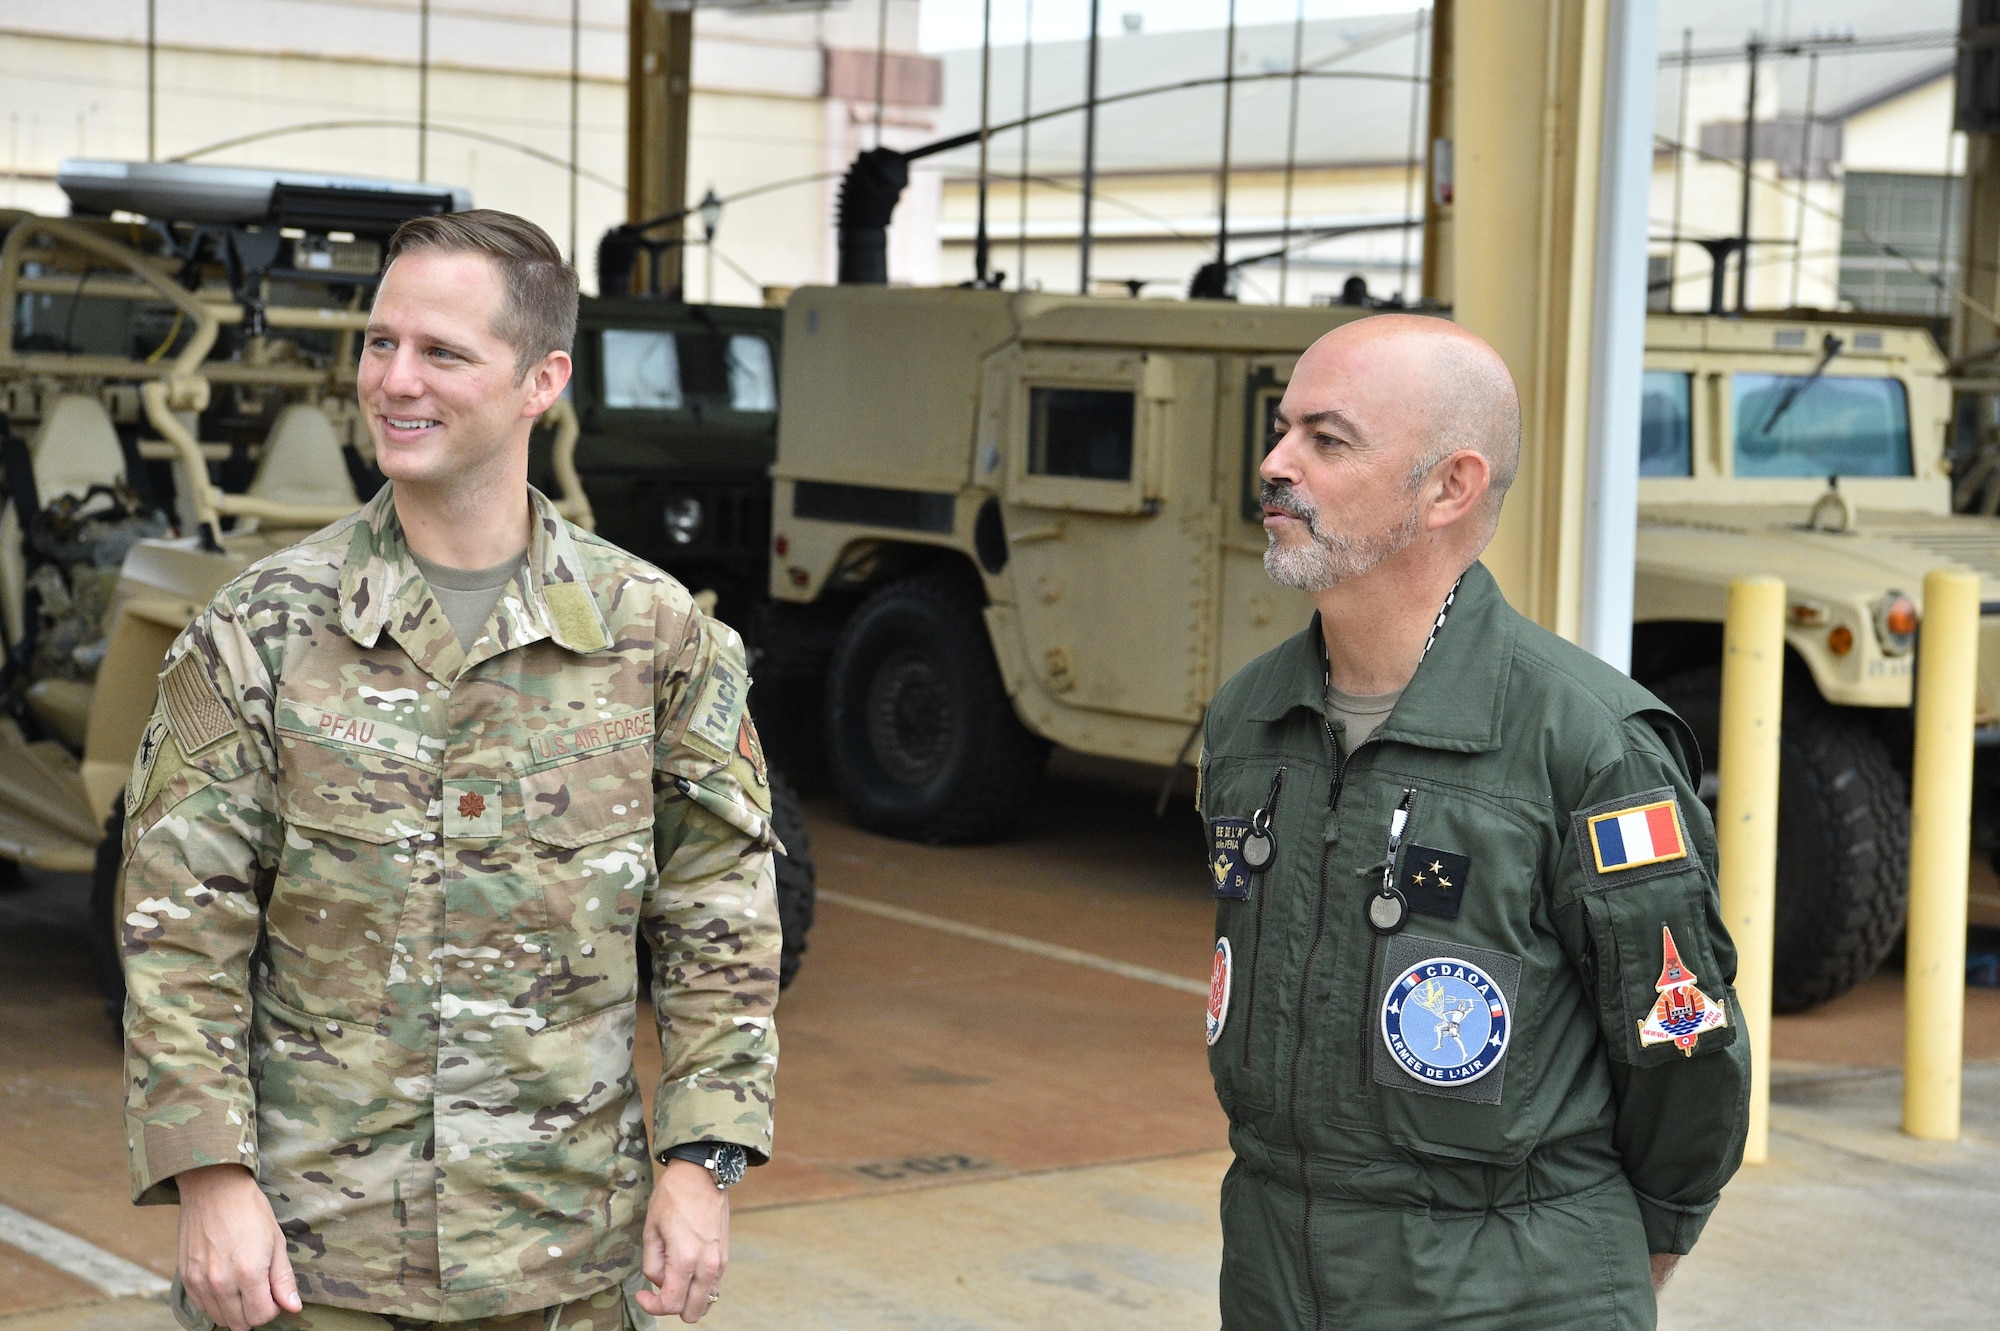 French Air Force Gen. Louis Pena, talks with the members from the 25th Air Support and Operations Squadron to learn about the mission of the Tactical Air Control Party Airmen at Wheeler Army Airfield, Hawaii, June 30, 2021. Pena was briefed on the capabilities of the 25th ASOS and given a demonstration of the Polaris MRZR, a multi-terrain vehicle used by TACP Airmen. (U.S. Air Force photos by 1st Lt. Benjamin Aronson)